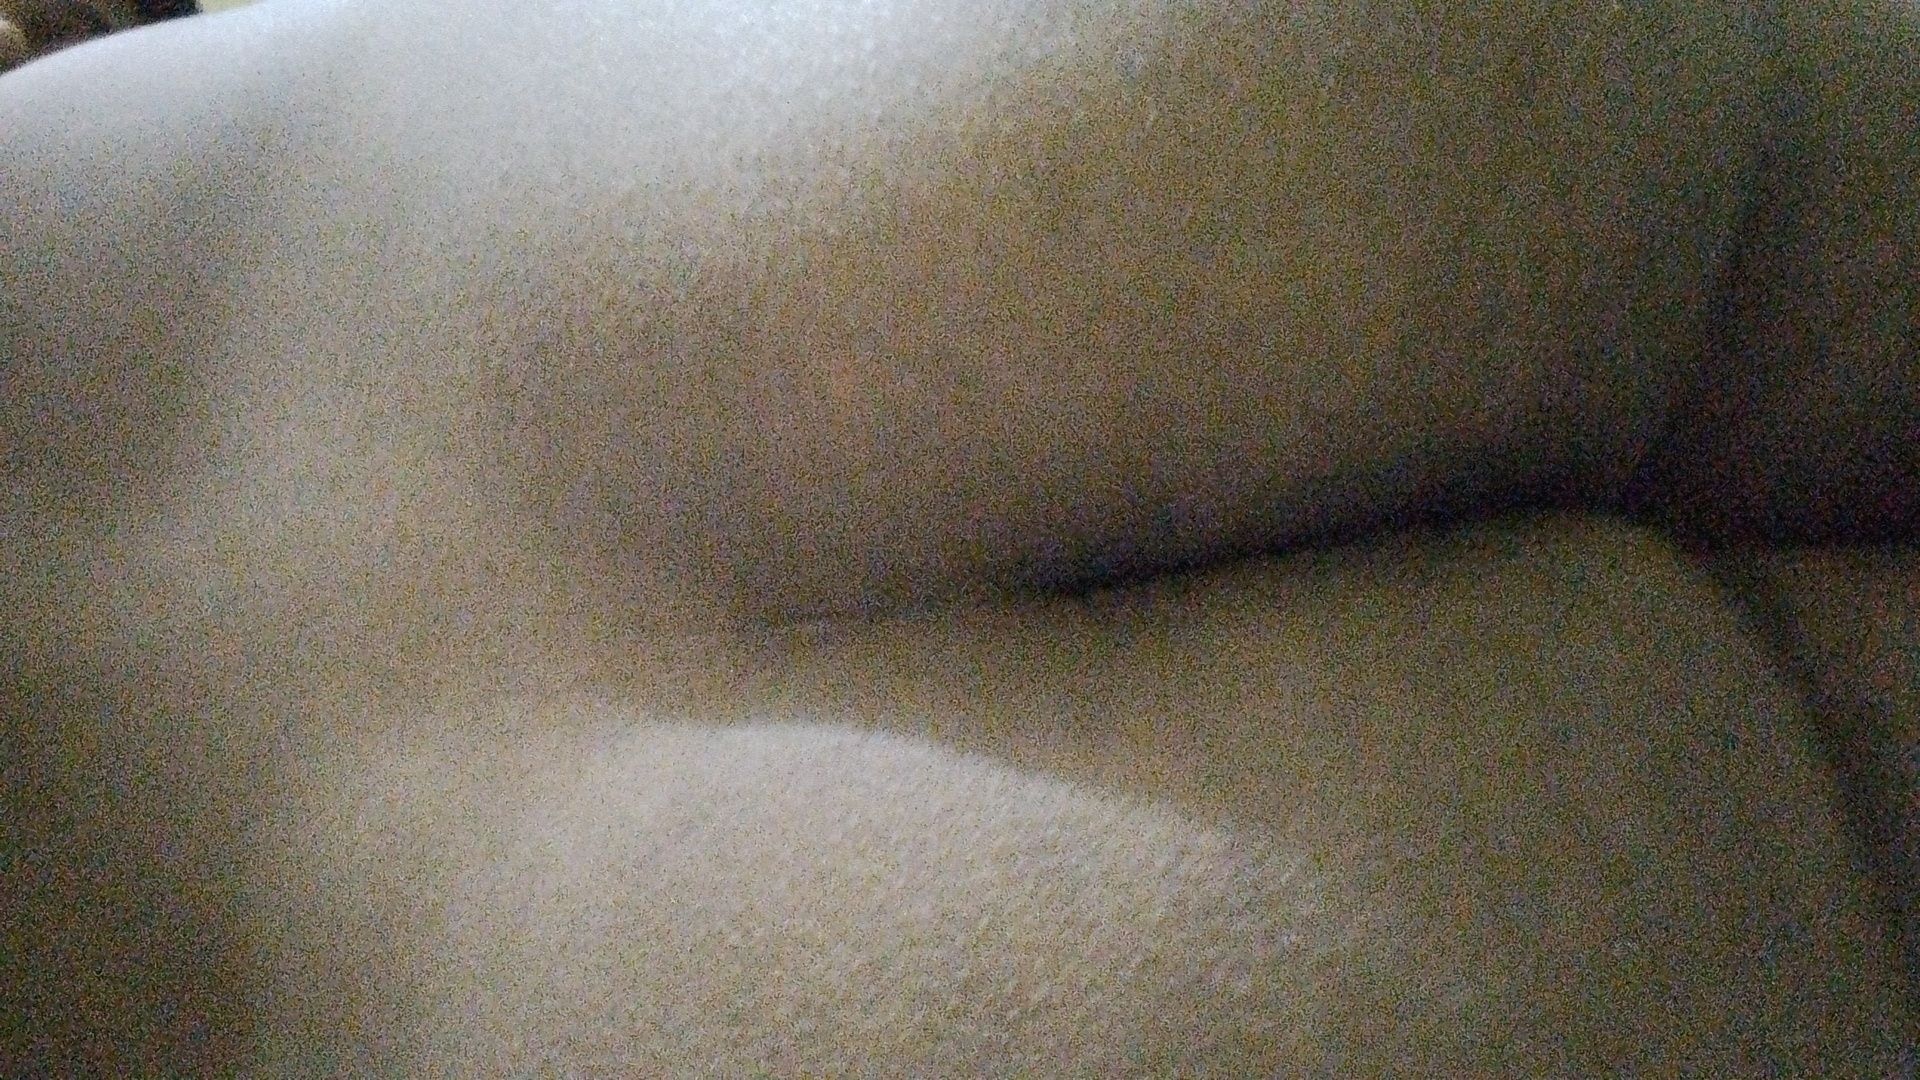 My Dick And Ass #2